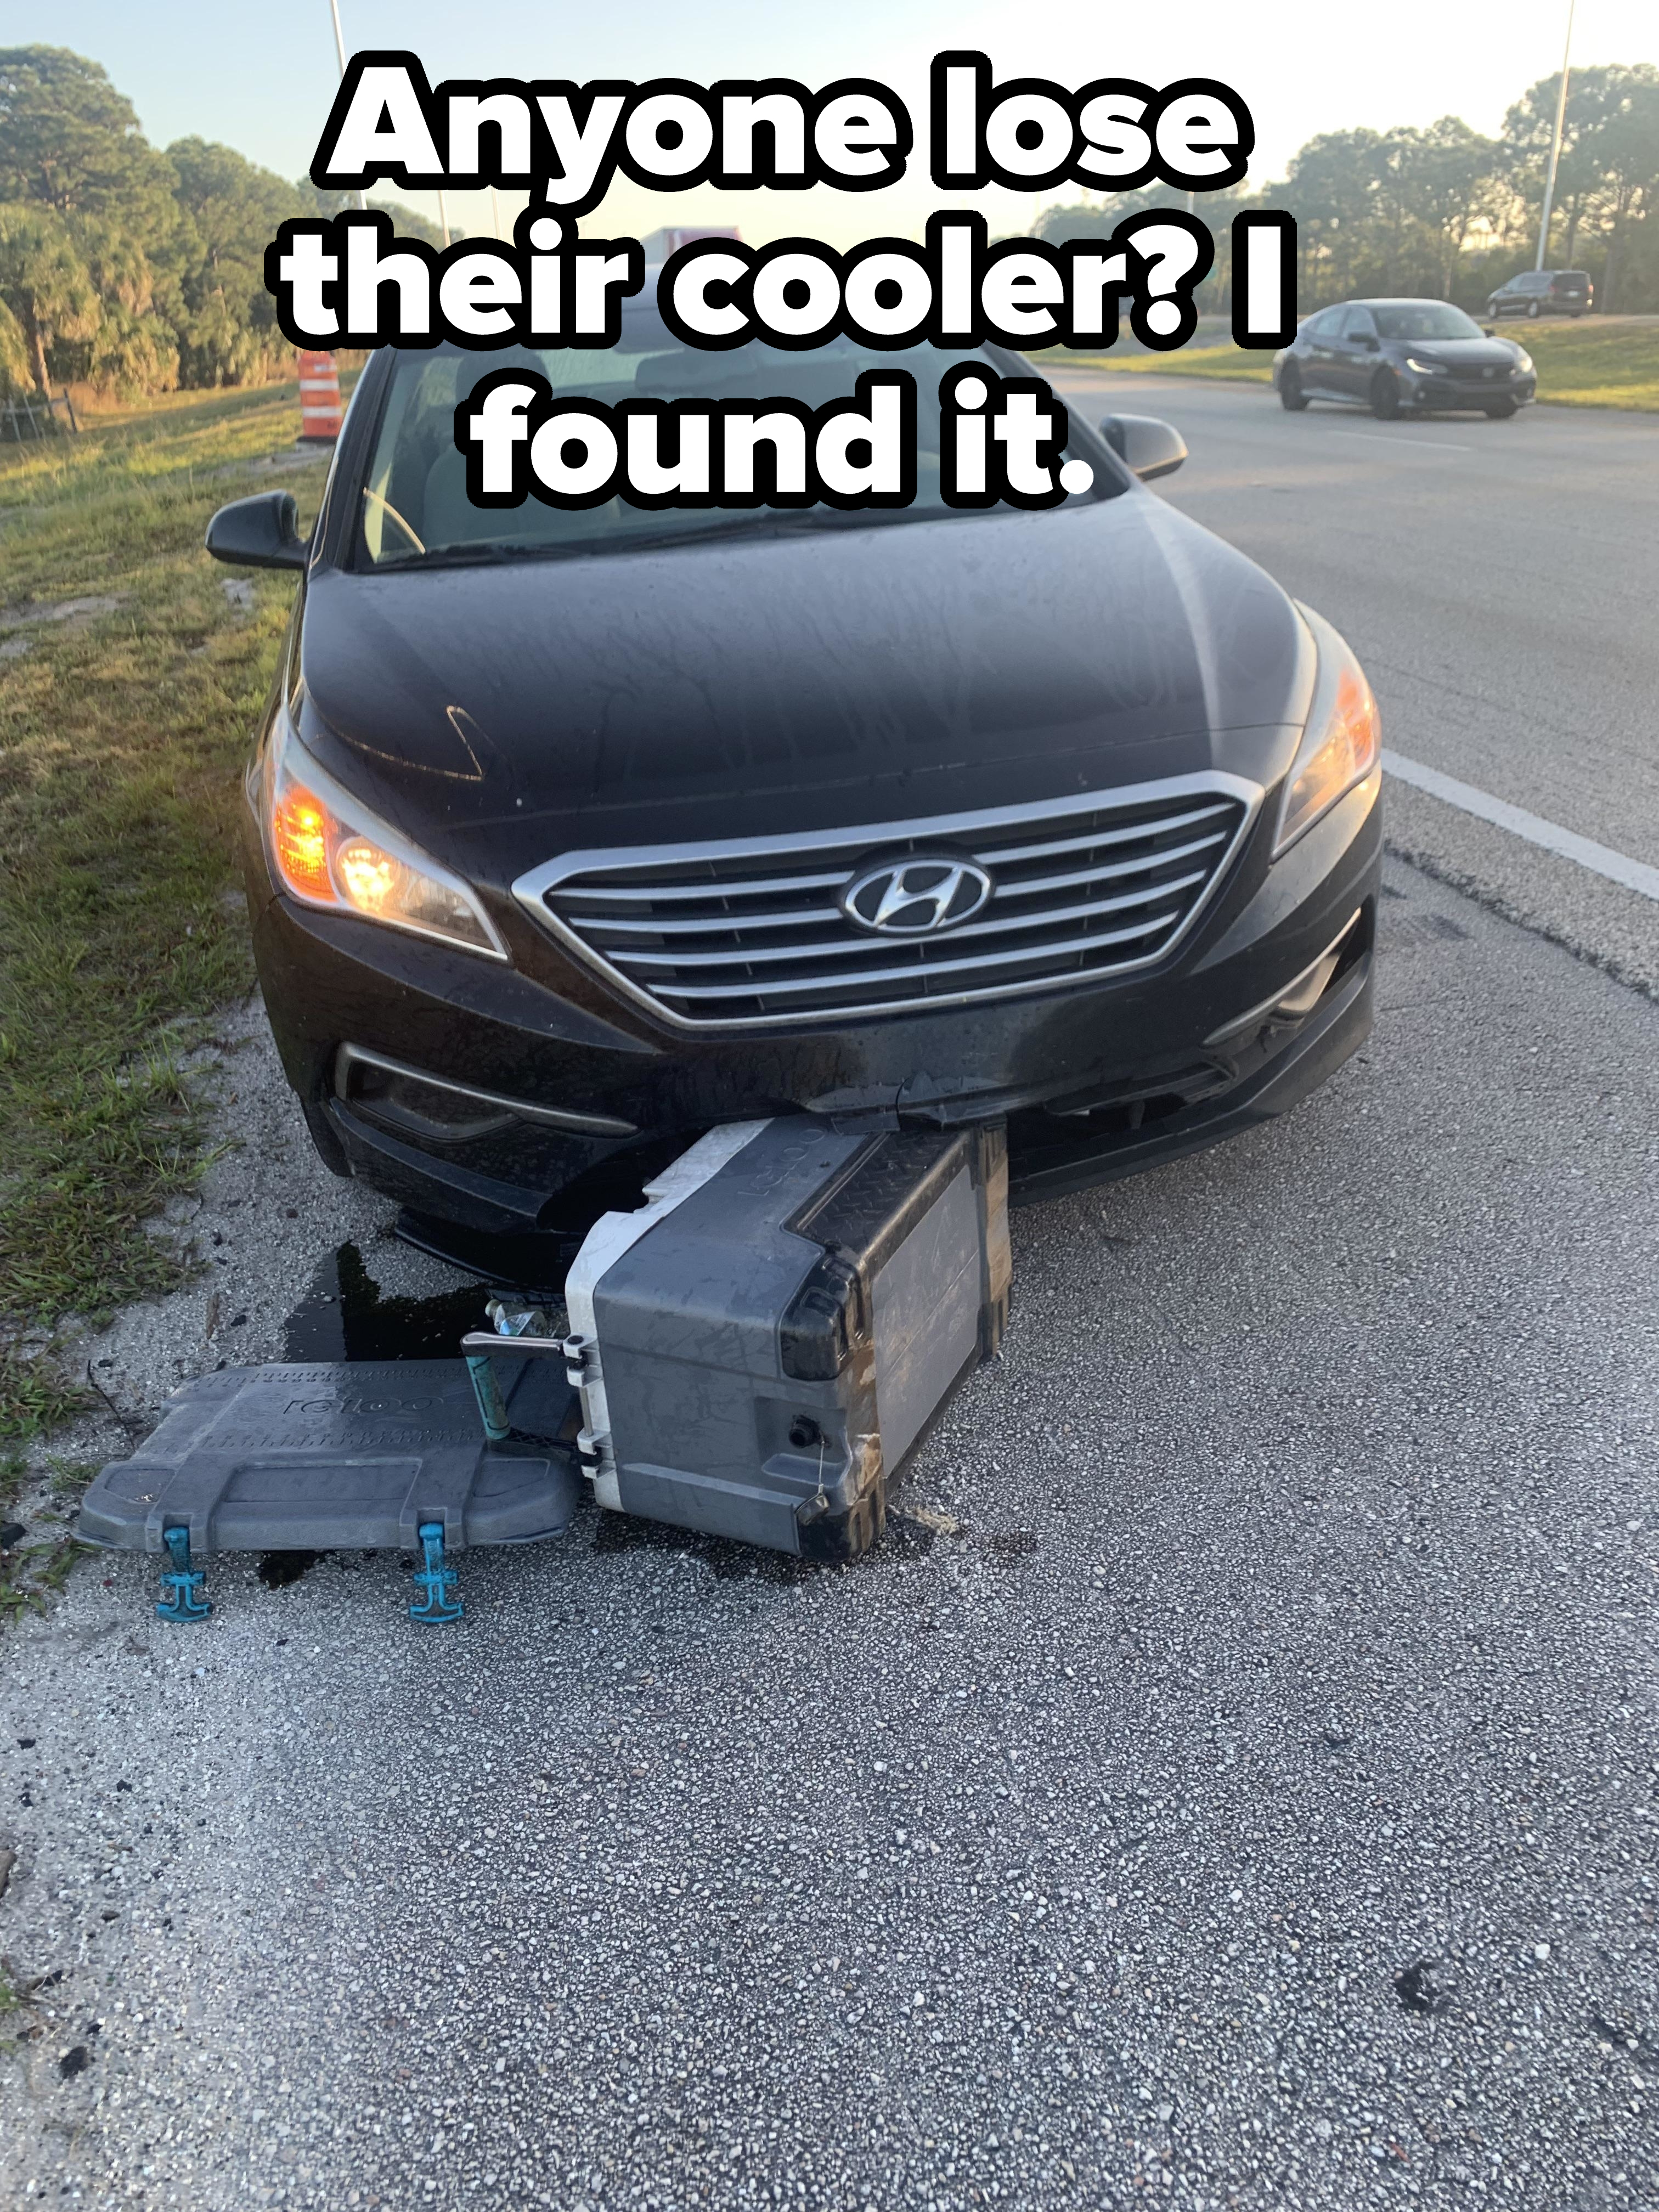 A damaged car with its front tire stuck in a pothole, causing the bumper to partially detach from the vehicle